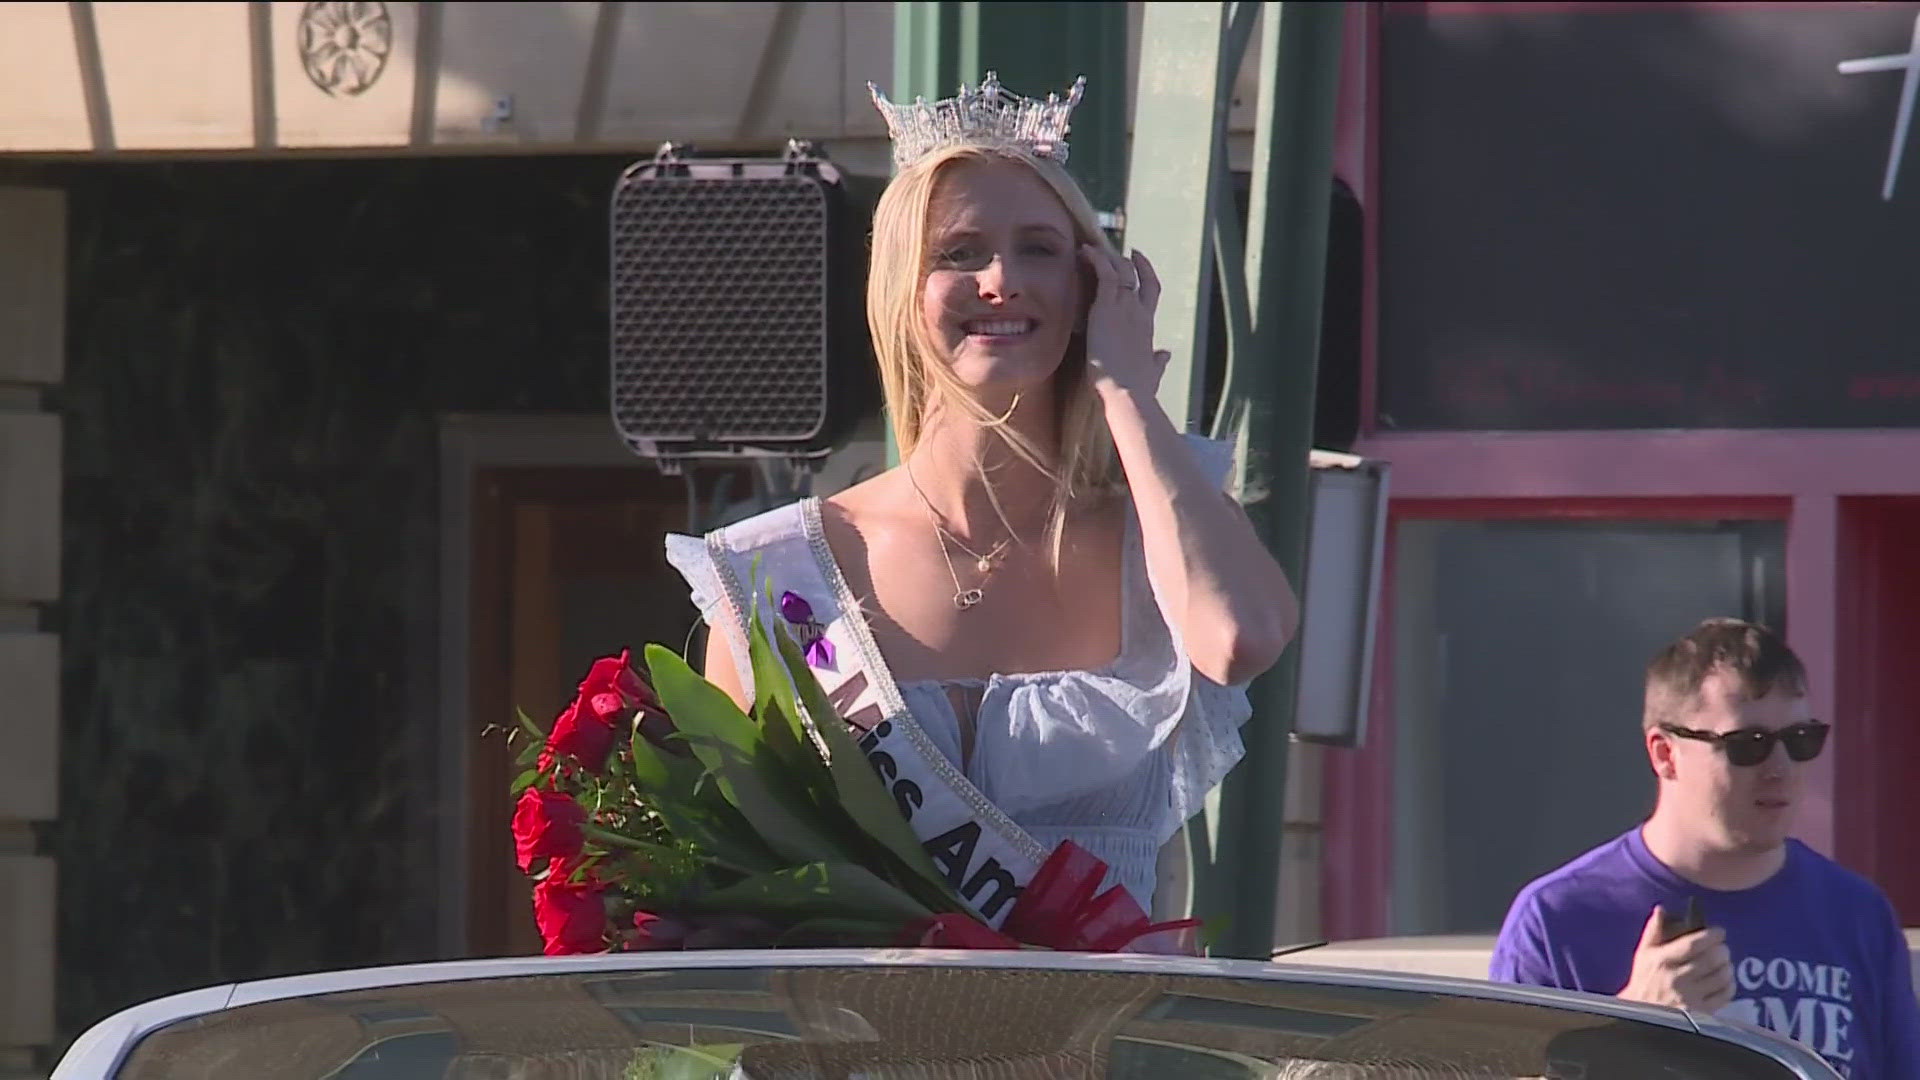 TODAY WAS A HOMECOMING FOR FORT SMITH NATIVE MISS AMERICA MADISON MARSH – FULL OF FESTIVITIES...